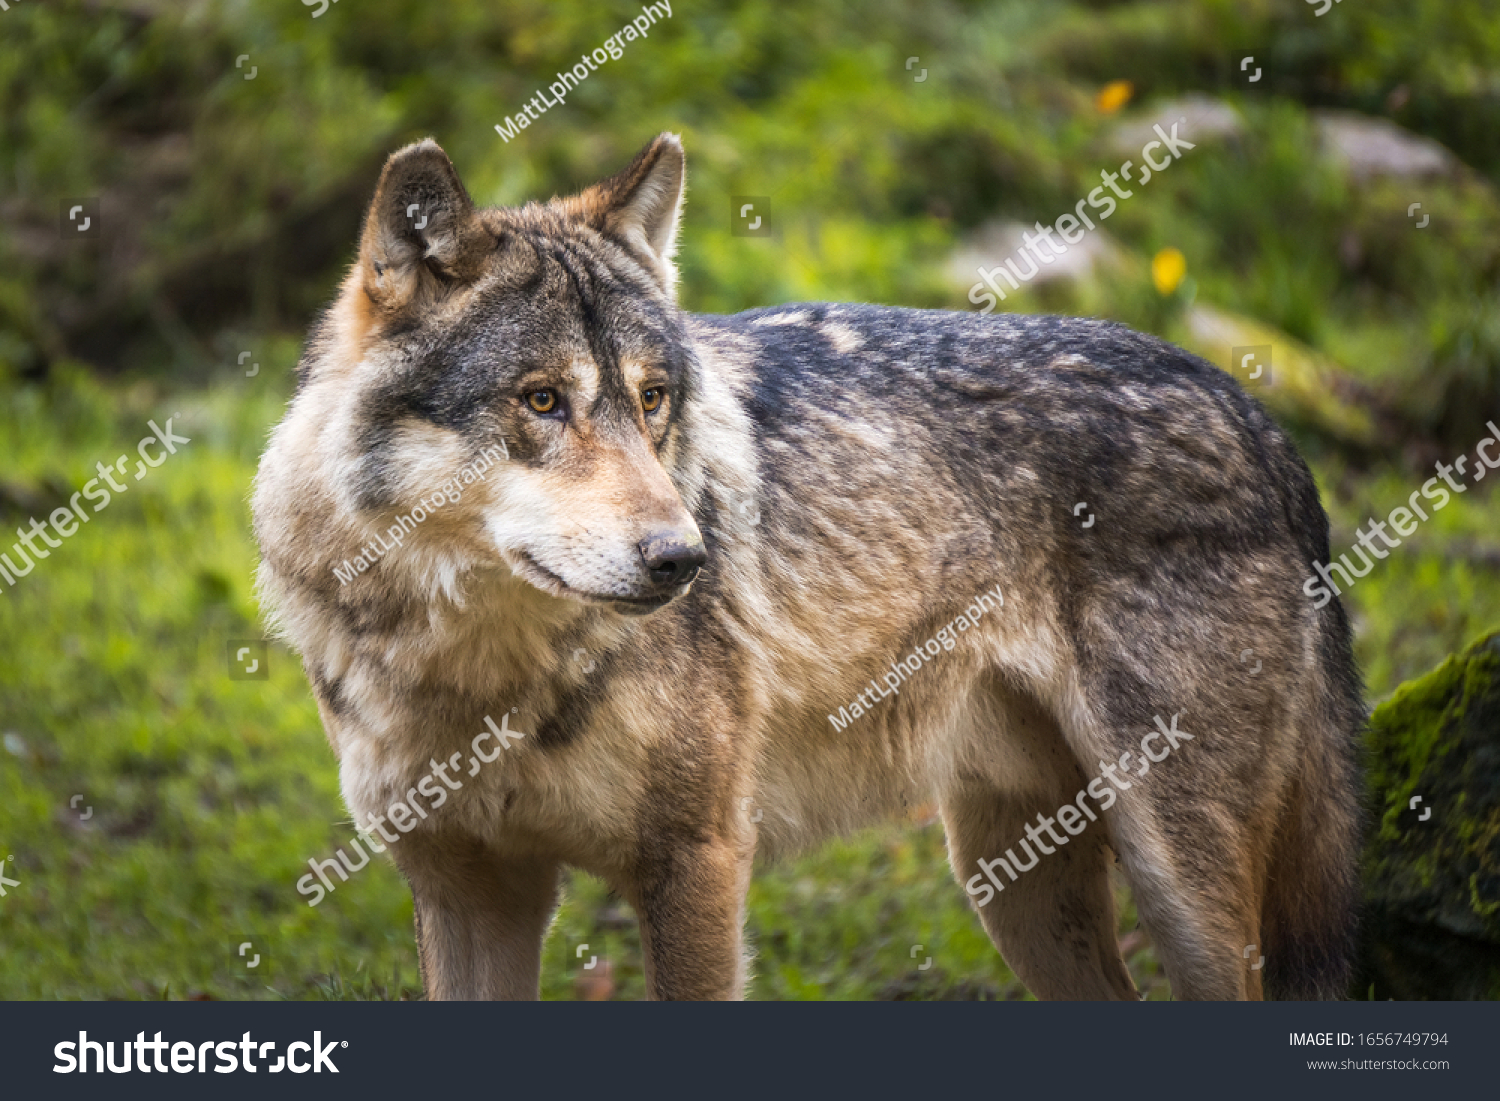 Portrait of a gray or european or eurasian wolf, canis lupus lupus, France. #1656749794